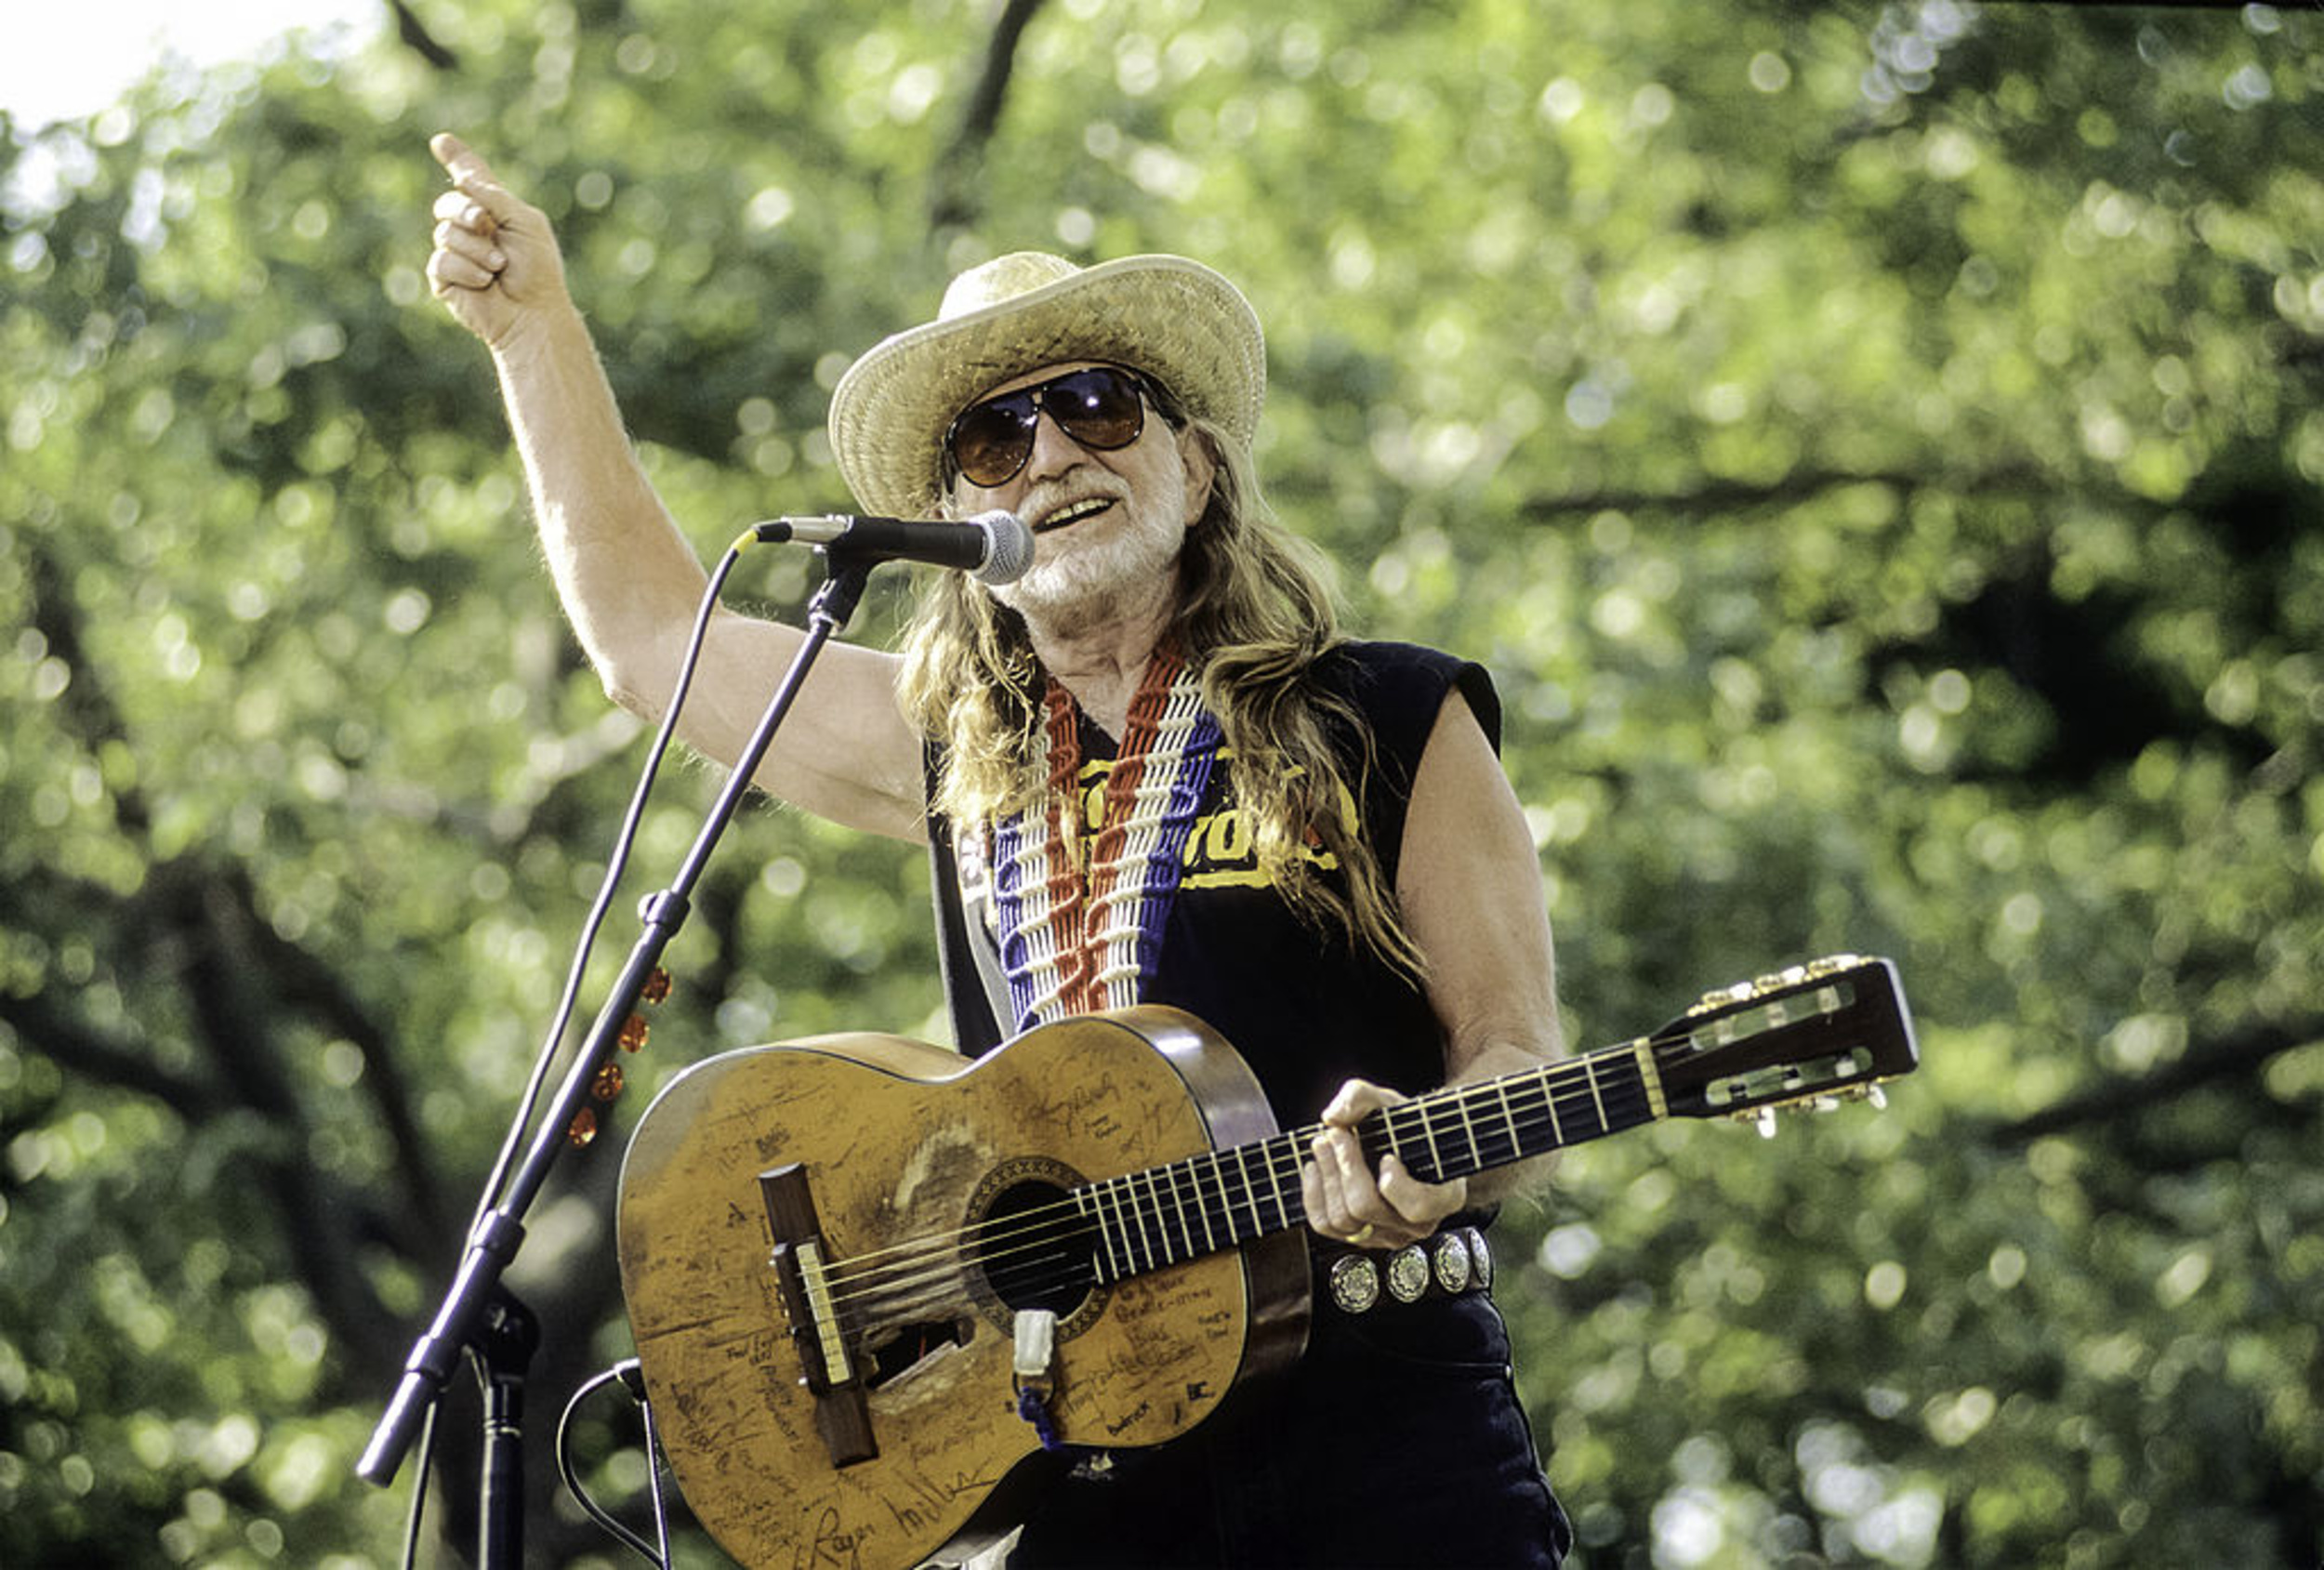 <p>No road trip would be complete without Willie Nelson's 1980 classic "On The Road Again," perfect for when you're traveling with a big group of friends for a weekend getaway. </p><p>You may also like: <a href='https://www.yardbarker.com/entertainment/articles/popular_books_that_were_made_into_terrible_movies_022124/s1__29971472'>Popular books that were made into terrible movies</a></p>